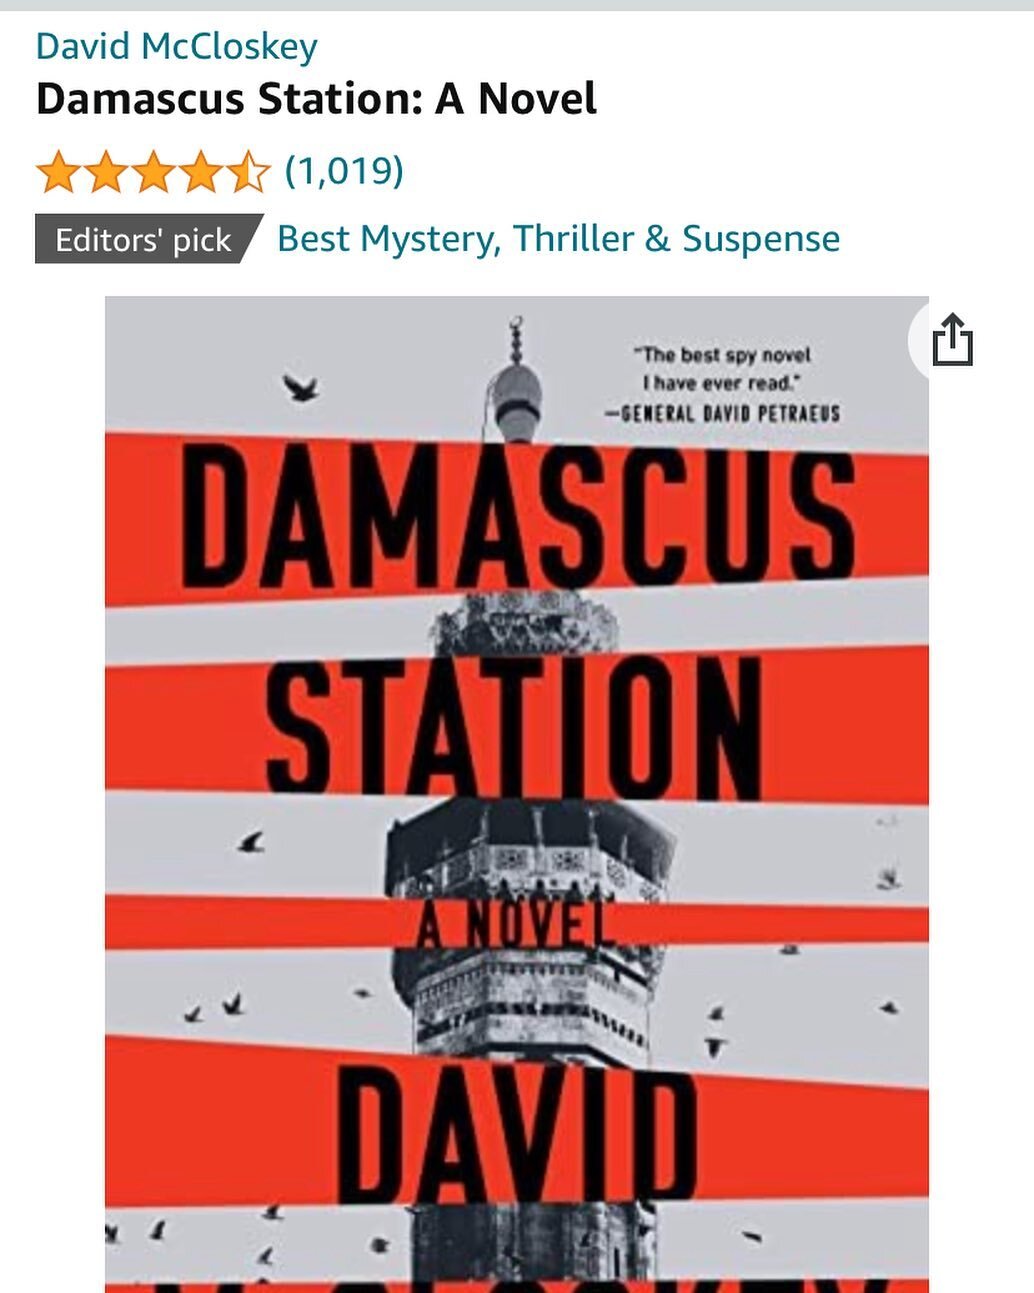 I know it&rsquo;s a random milestone, but still pretty cool to see Damascus Station cross the 1,000 rating mark on Amazon (and most of them are also pretty good!) Thanks to all of the readers and supporters who made this possible. Very humbled and gr